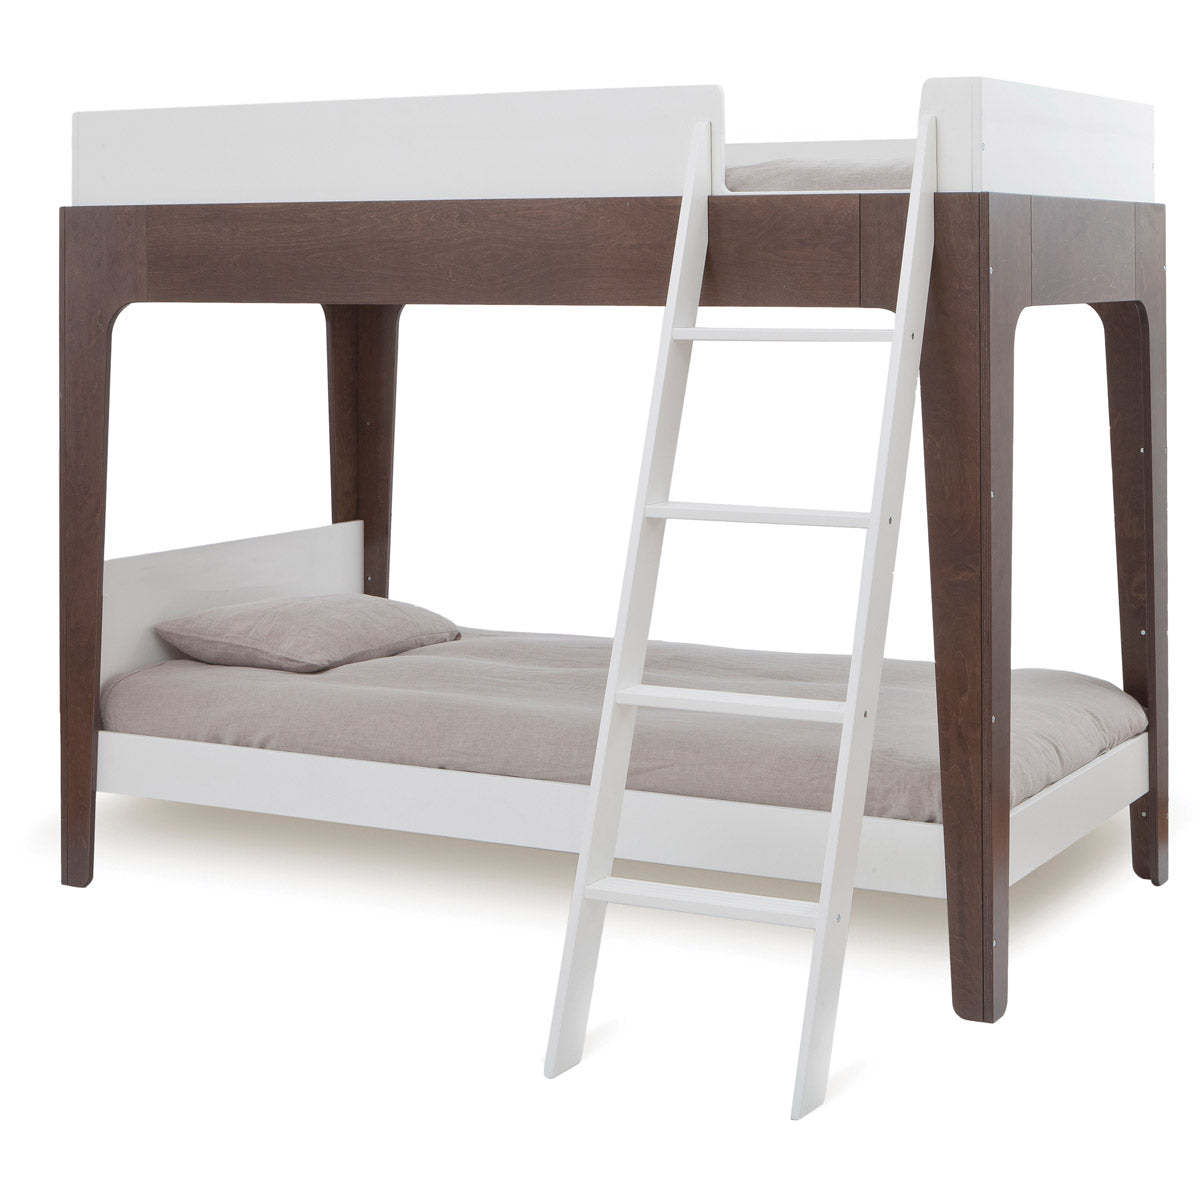 Oeuf Perch Bunk Bed Kids + Baby